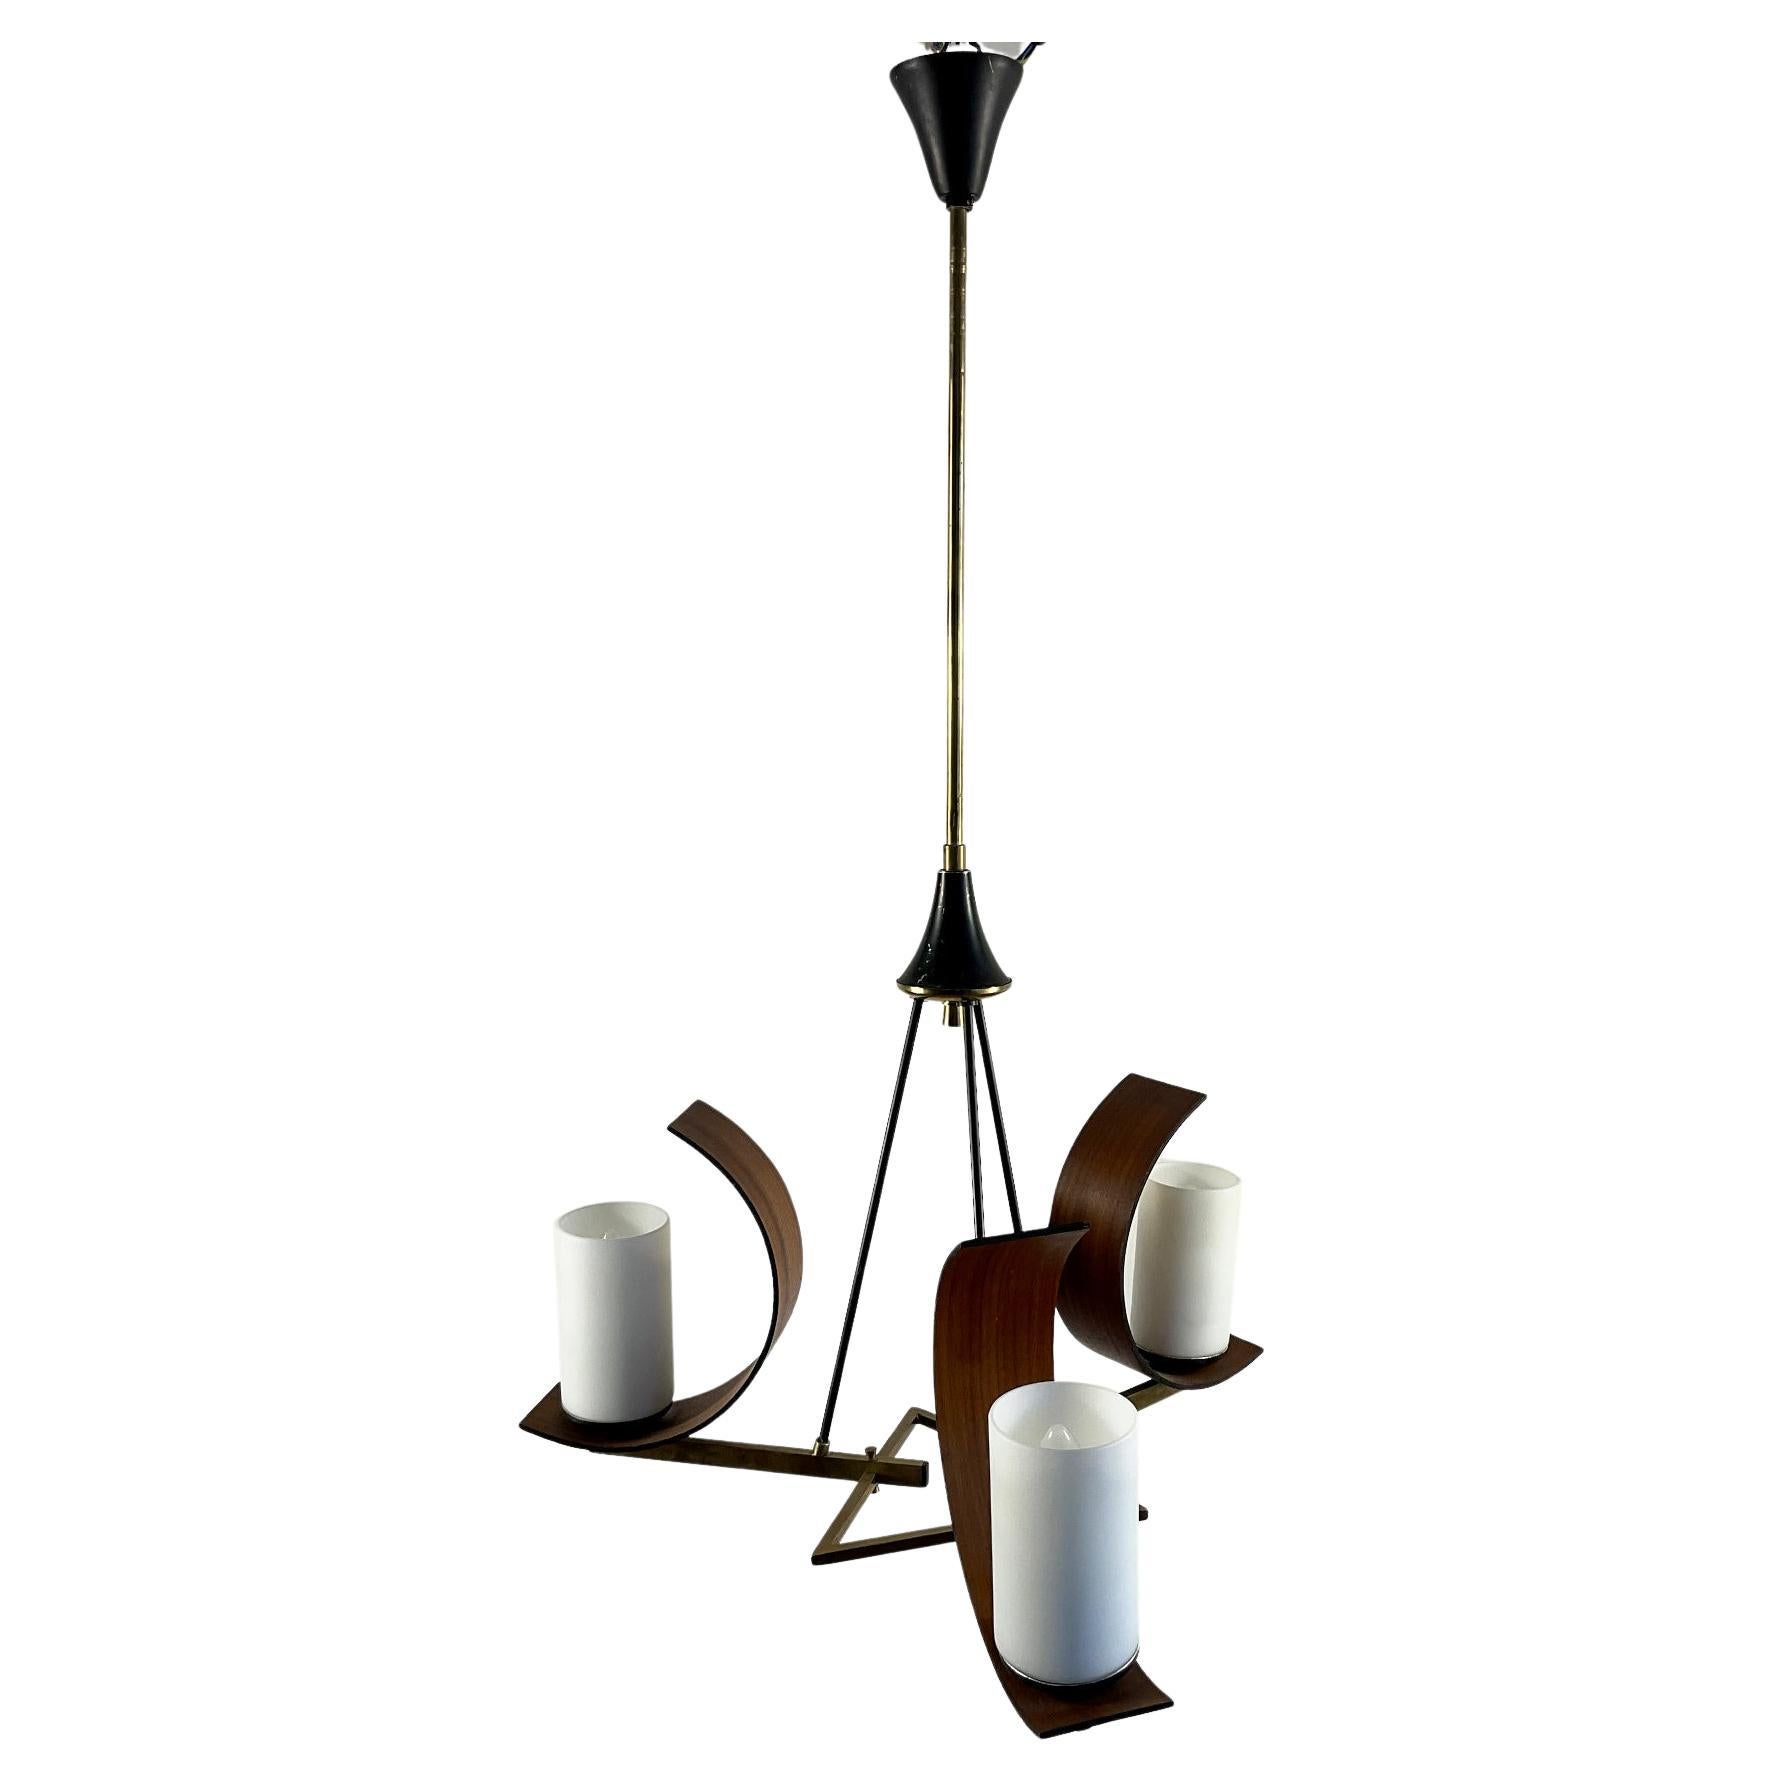 1960s Italian Ceiling Lamp Attributed to Stilnovo with 3 Opaline lampshades